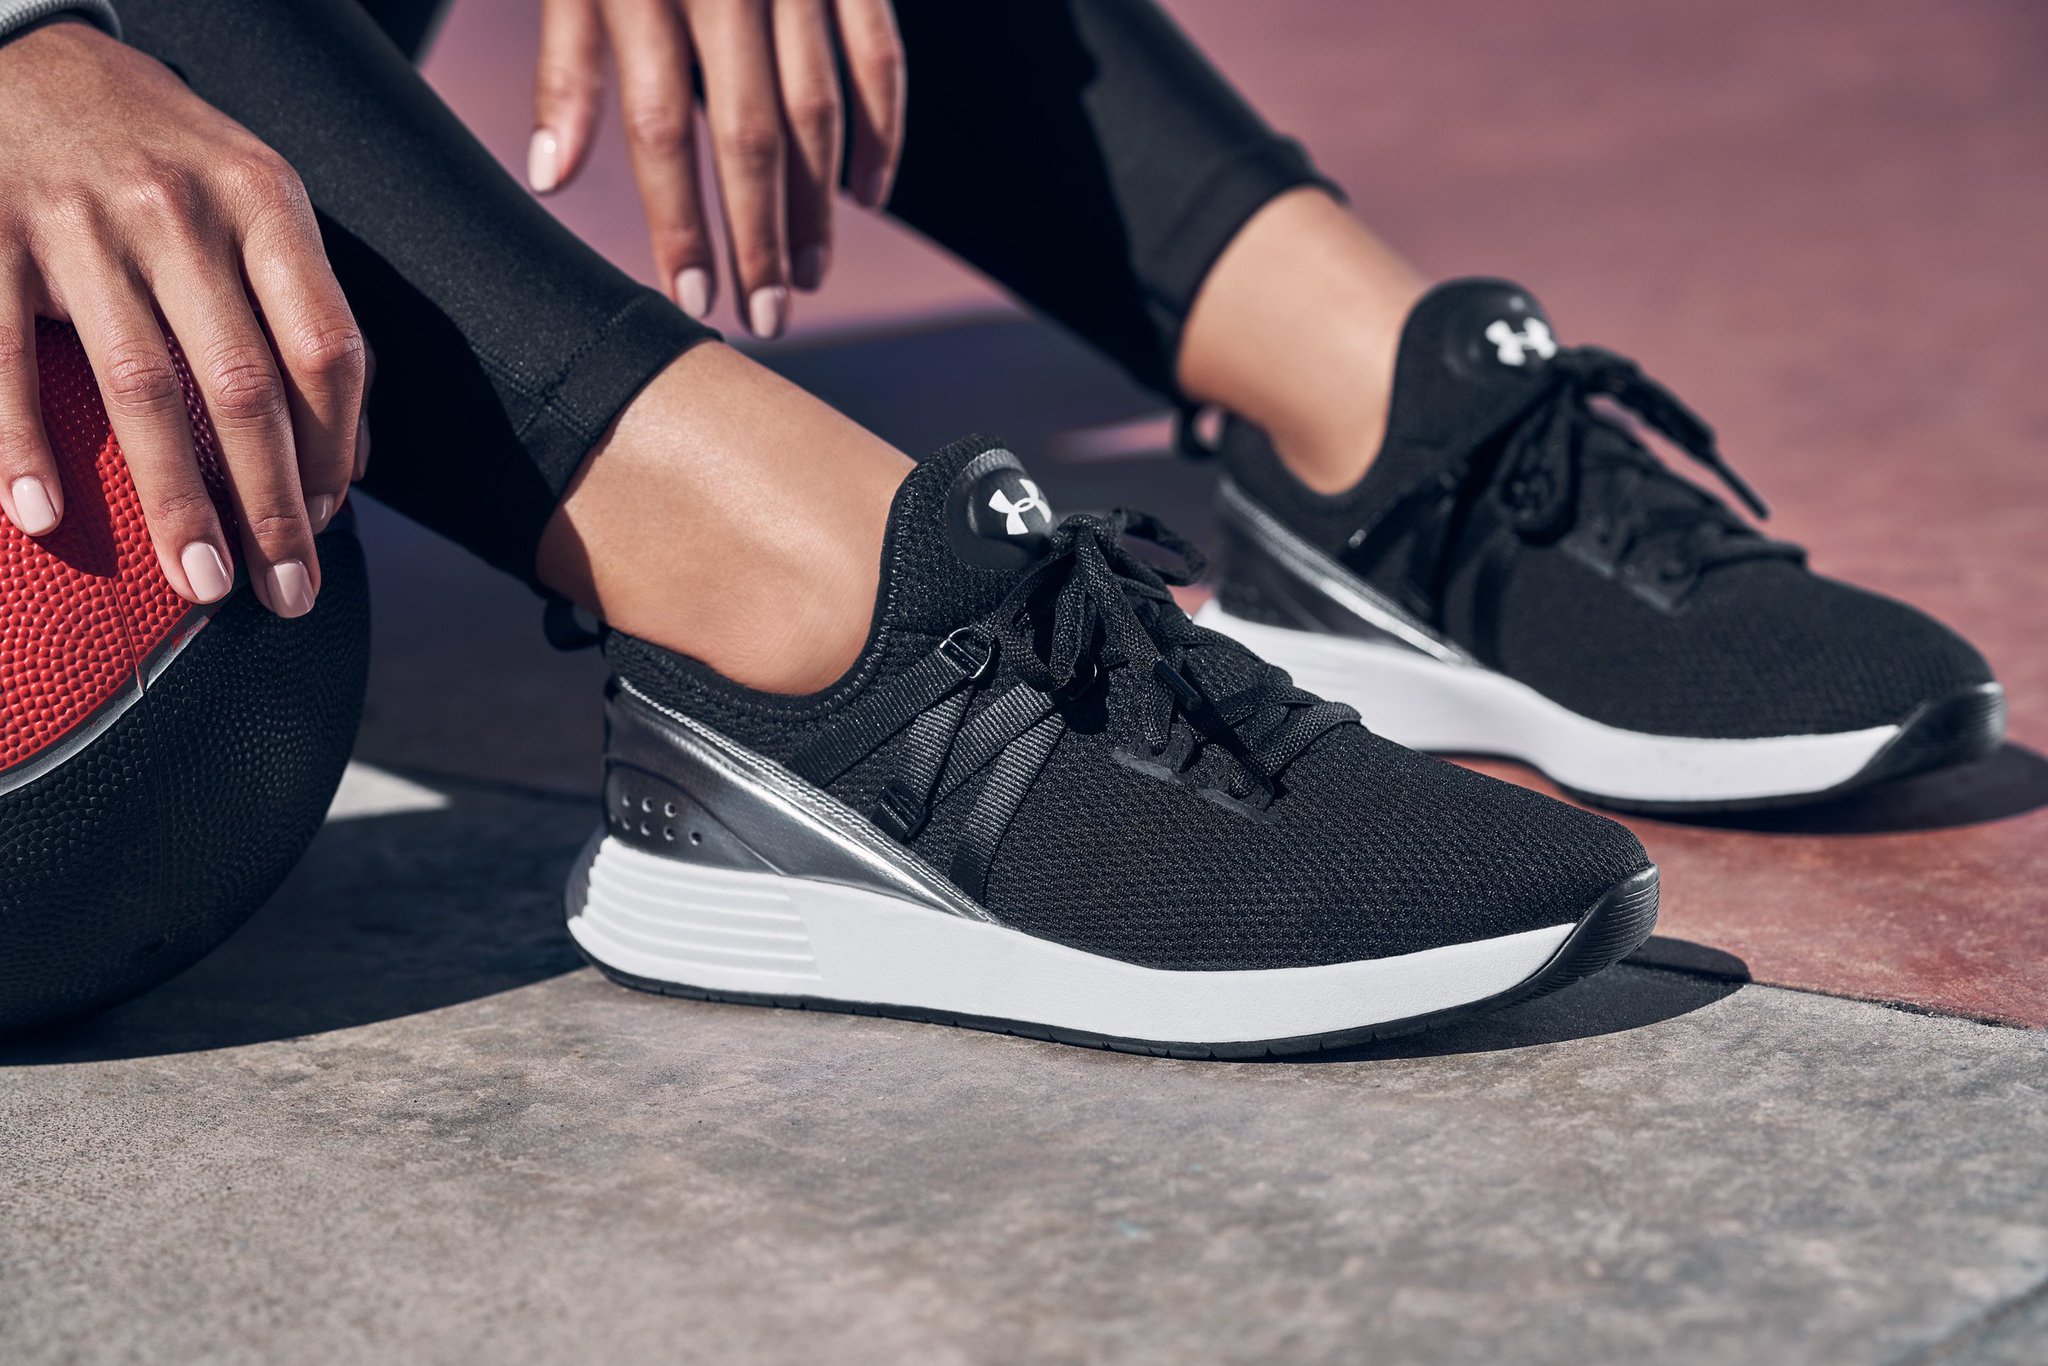 Ennegrecer gusano Es decir Under Armour Women on Twitter: "Meet the new UA Breathe Trainer. Designed  to give you comfort &amp; style every day while you train. Shop here --&gt;  https://t.co/9y4Jfh2Xvq https://t.co/GR2ylRQKeR" / Twitter